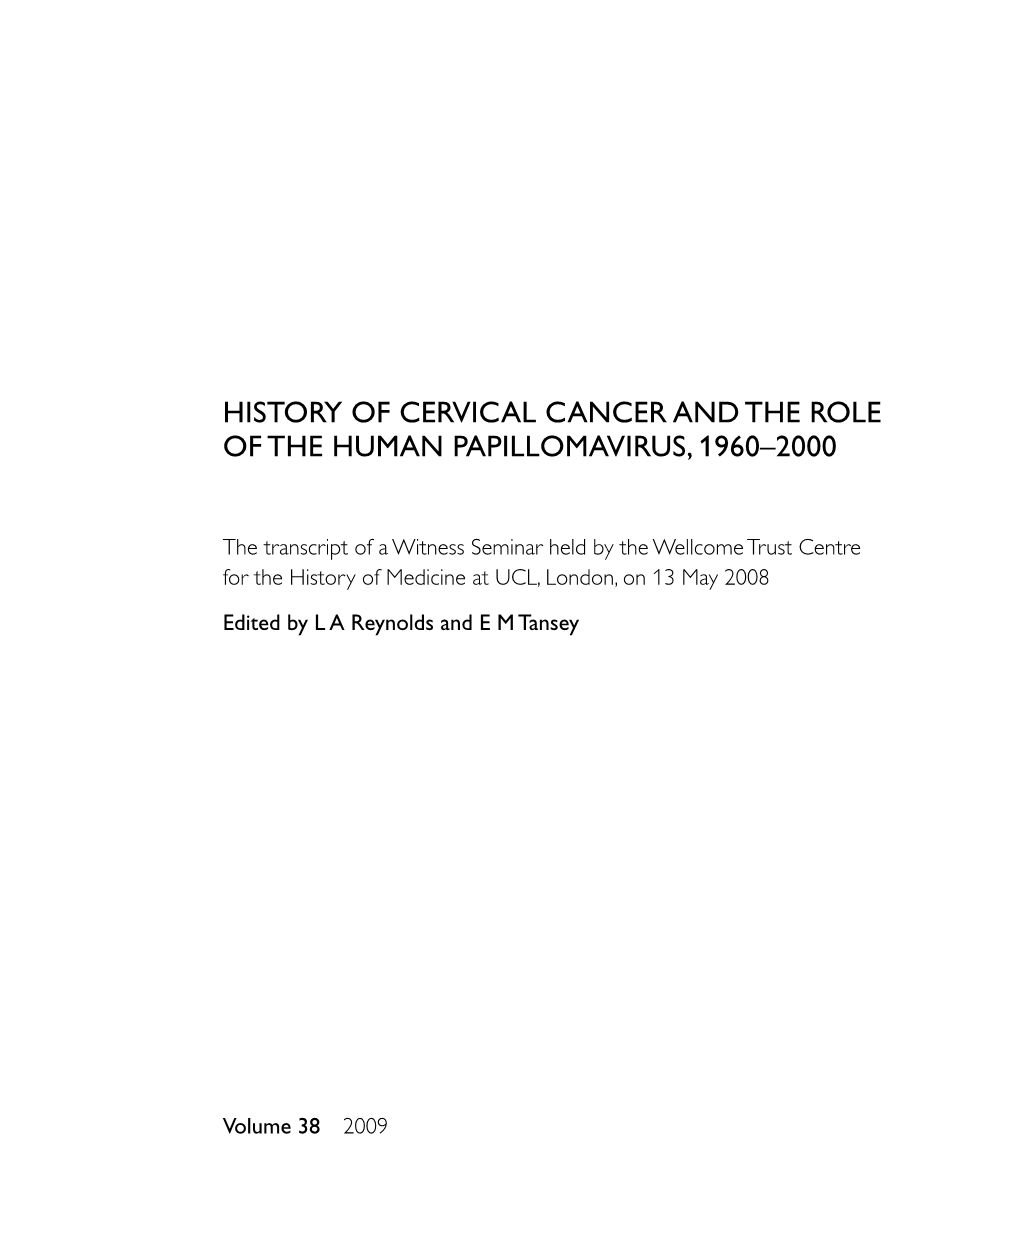 History of Cervical Cancer and the Role of Human